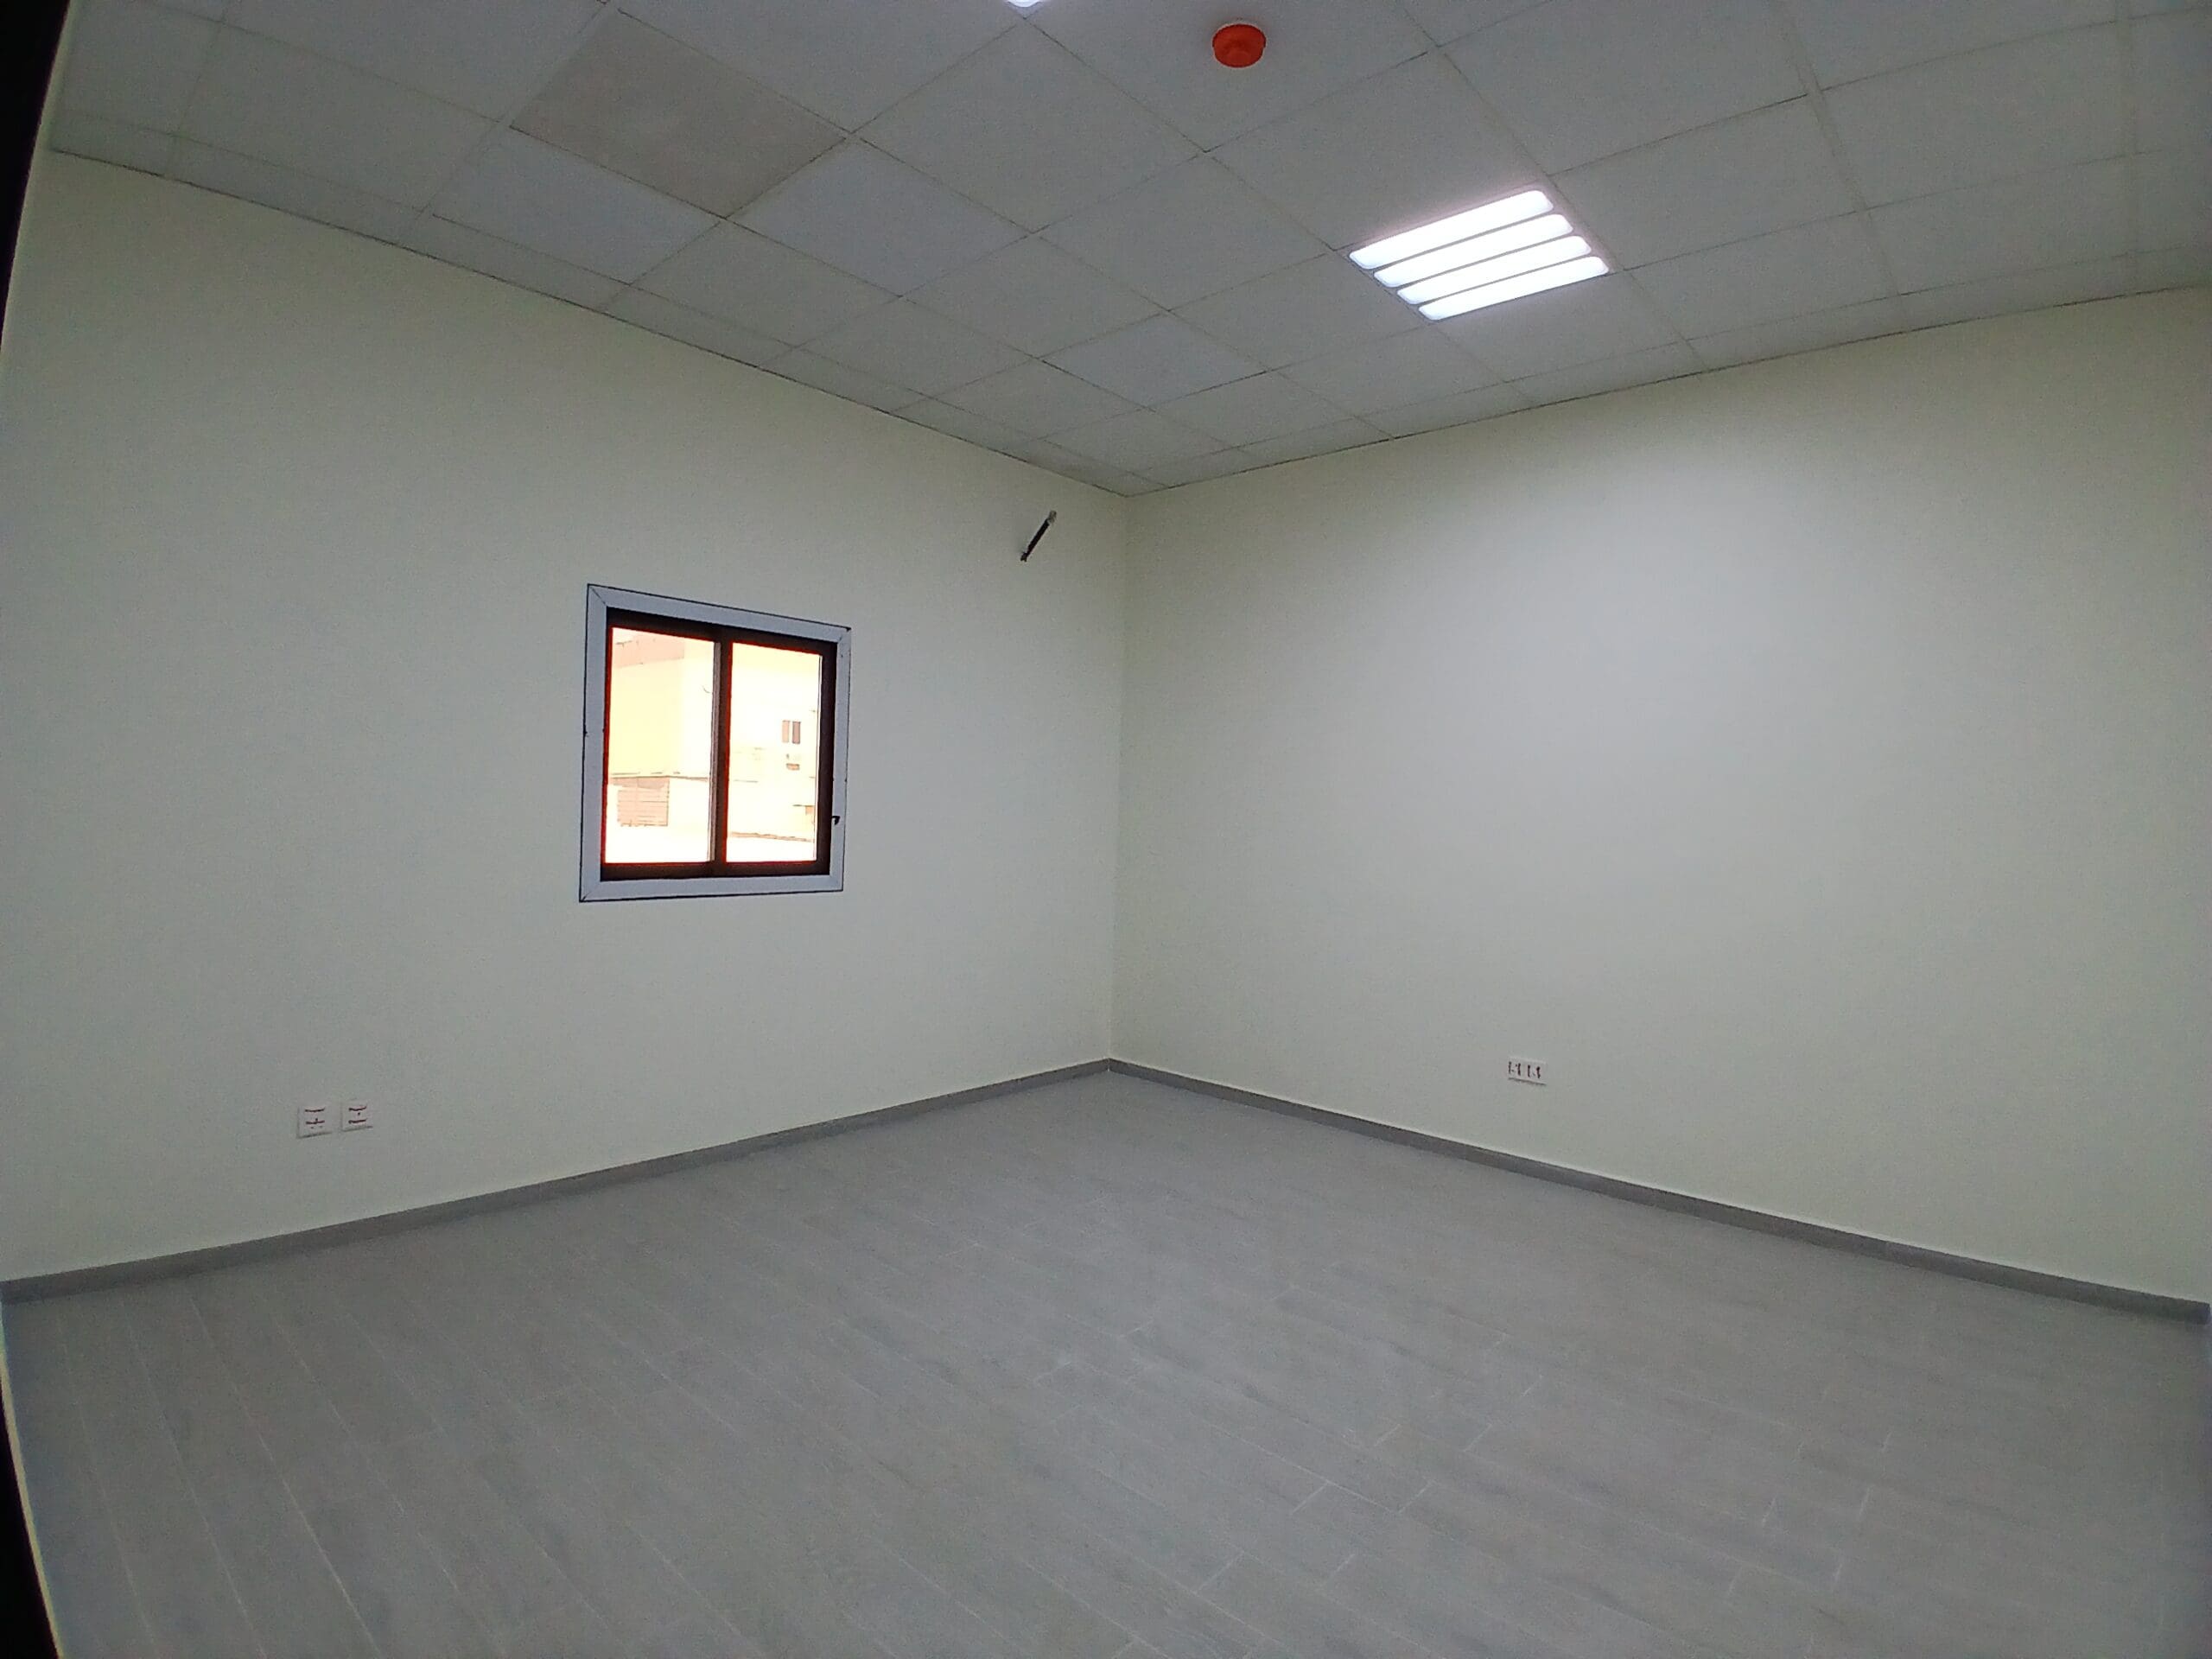 Empty modern office room with gray tiled floor, white walls, and a single window titled 